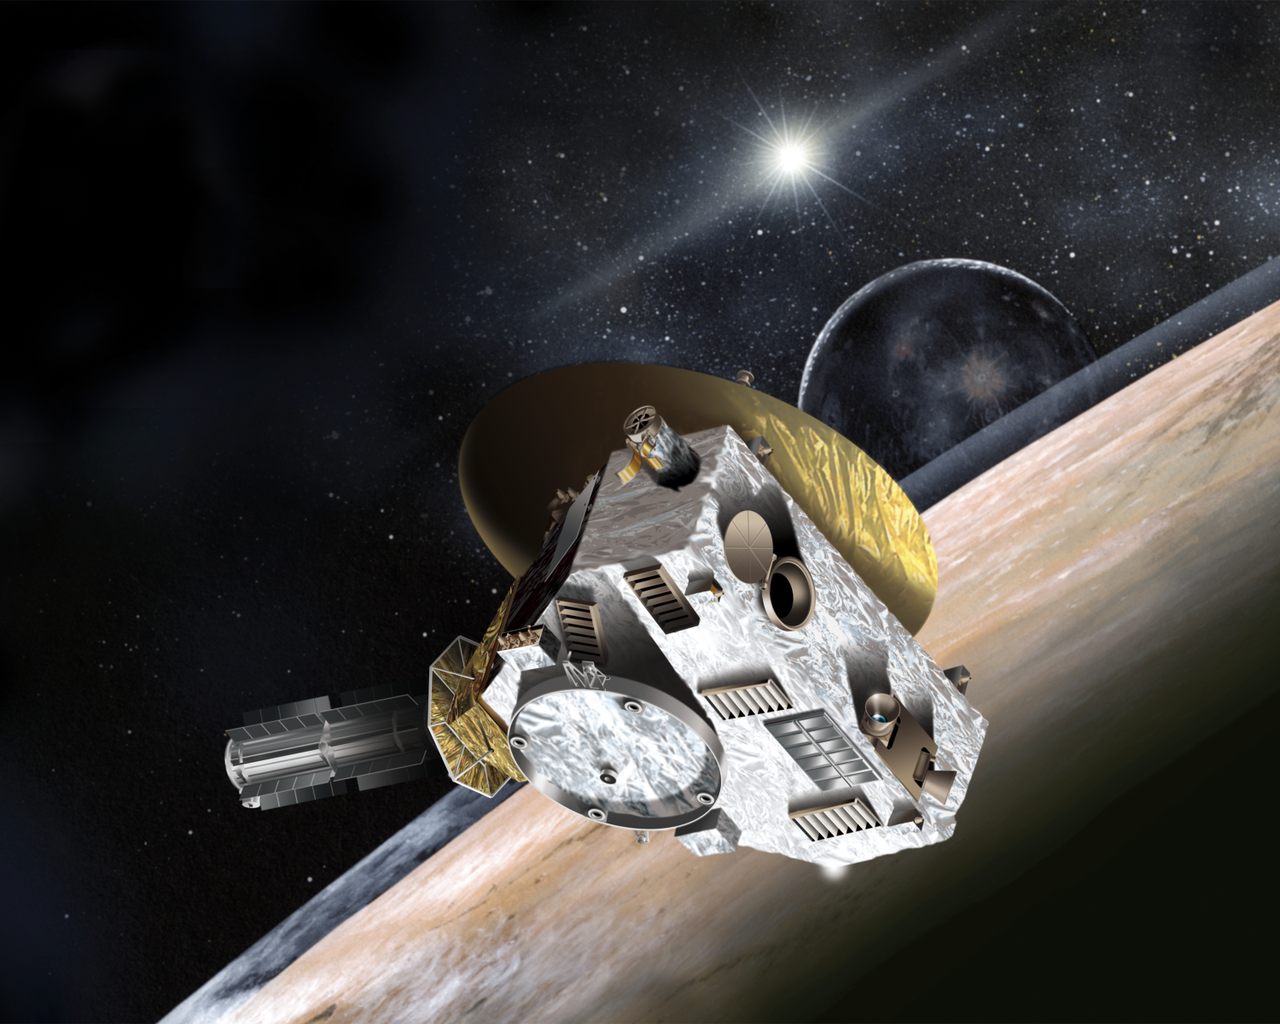 NASA commissioned this artistic concept of what New Horizons—the spacecraft carrying one ounce of Clyde Tombaugh's cremated remains—looked like as it passed Pluto.